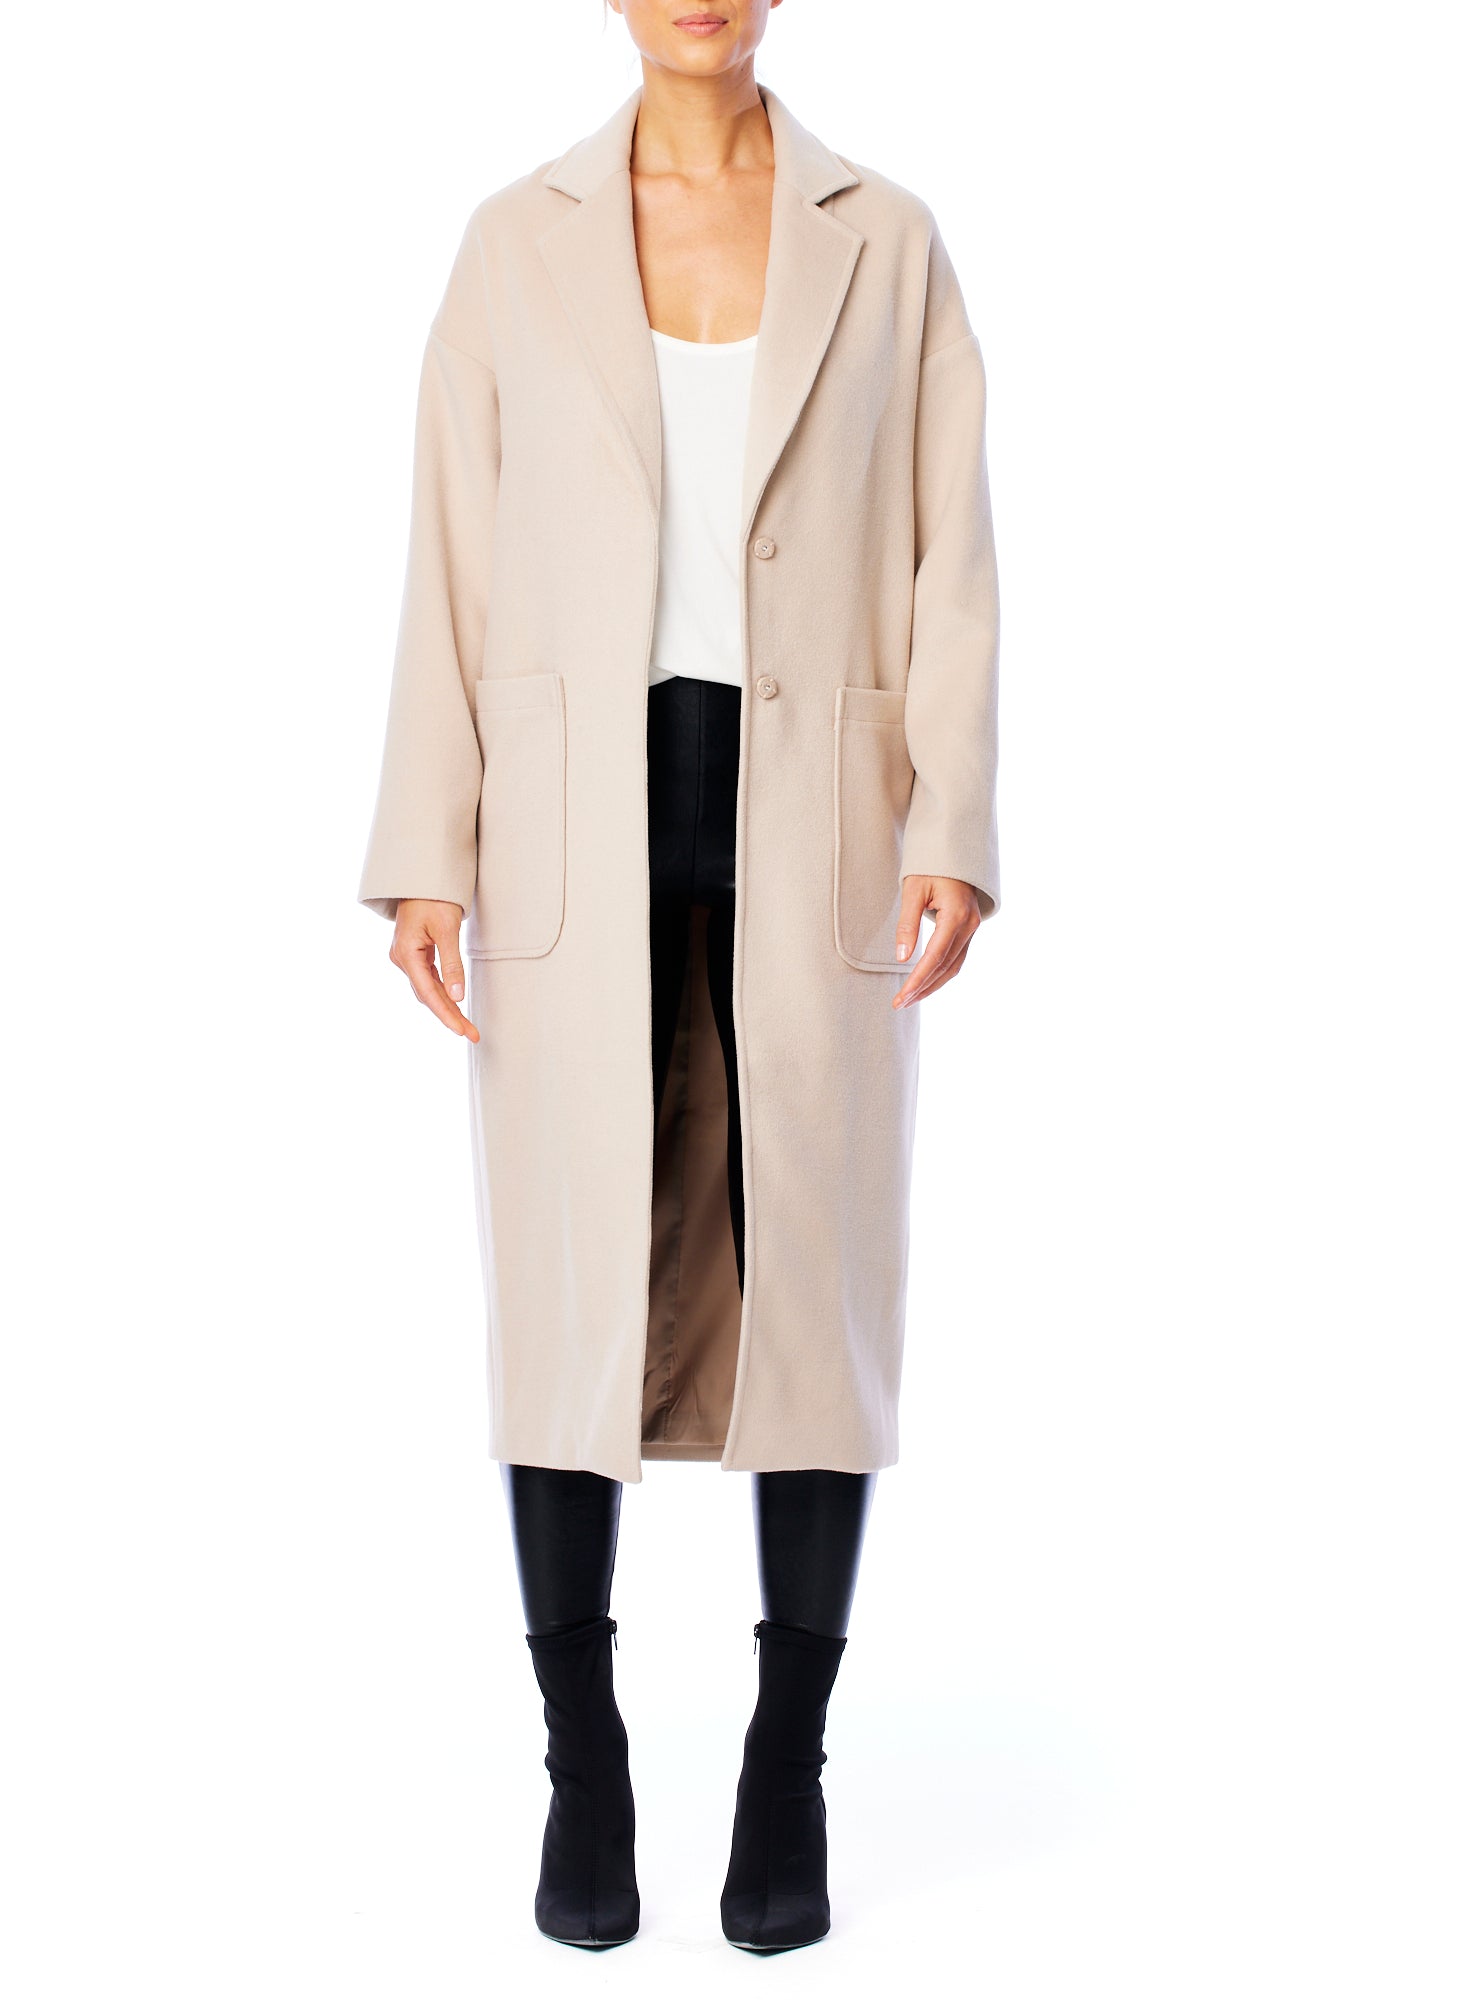 chic midi length jacket featuring hidden snap closure and large front pockets - front